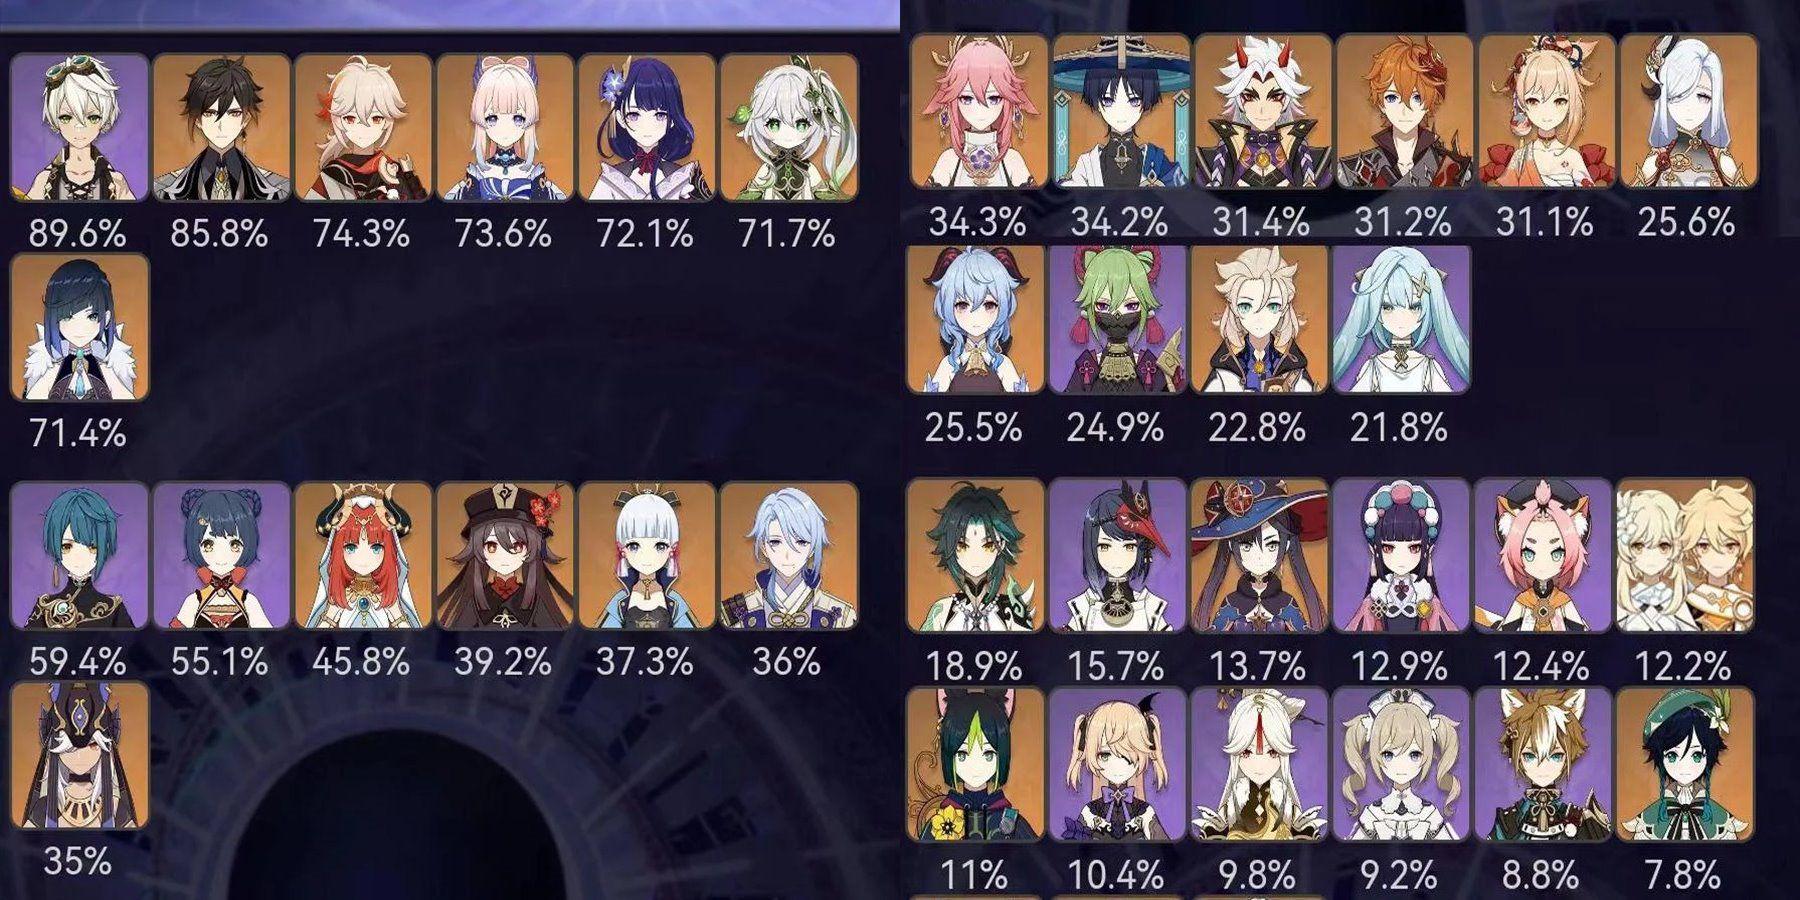 Genshin Impact 3.3 Chart mostra os personagens mais populares para Spiral Abyss Phase 2